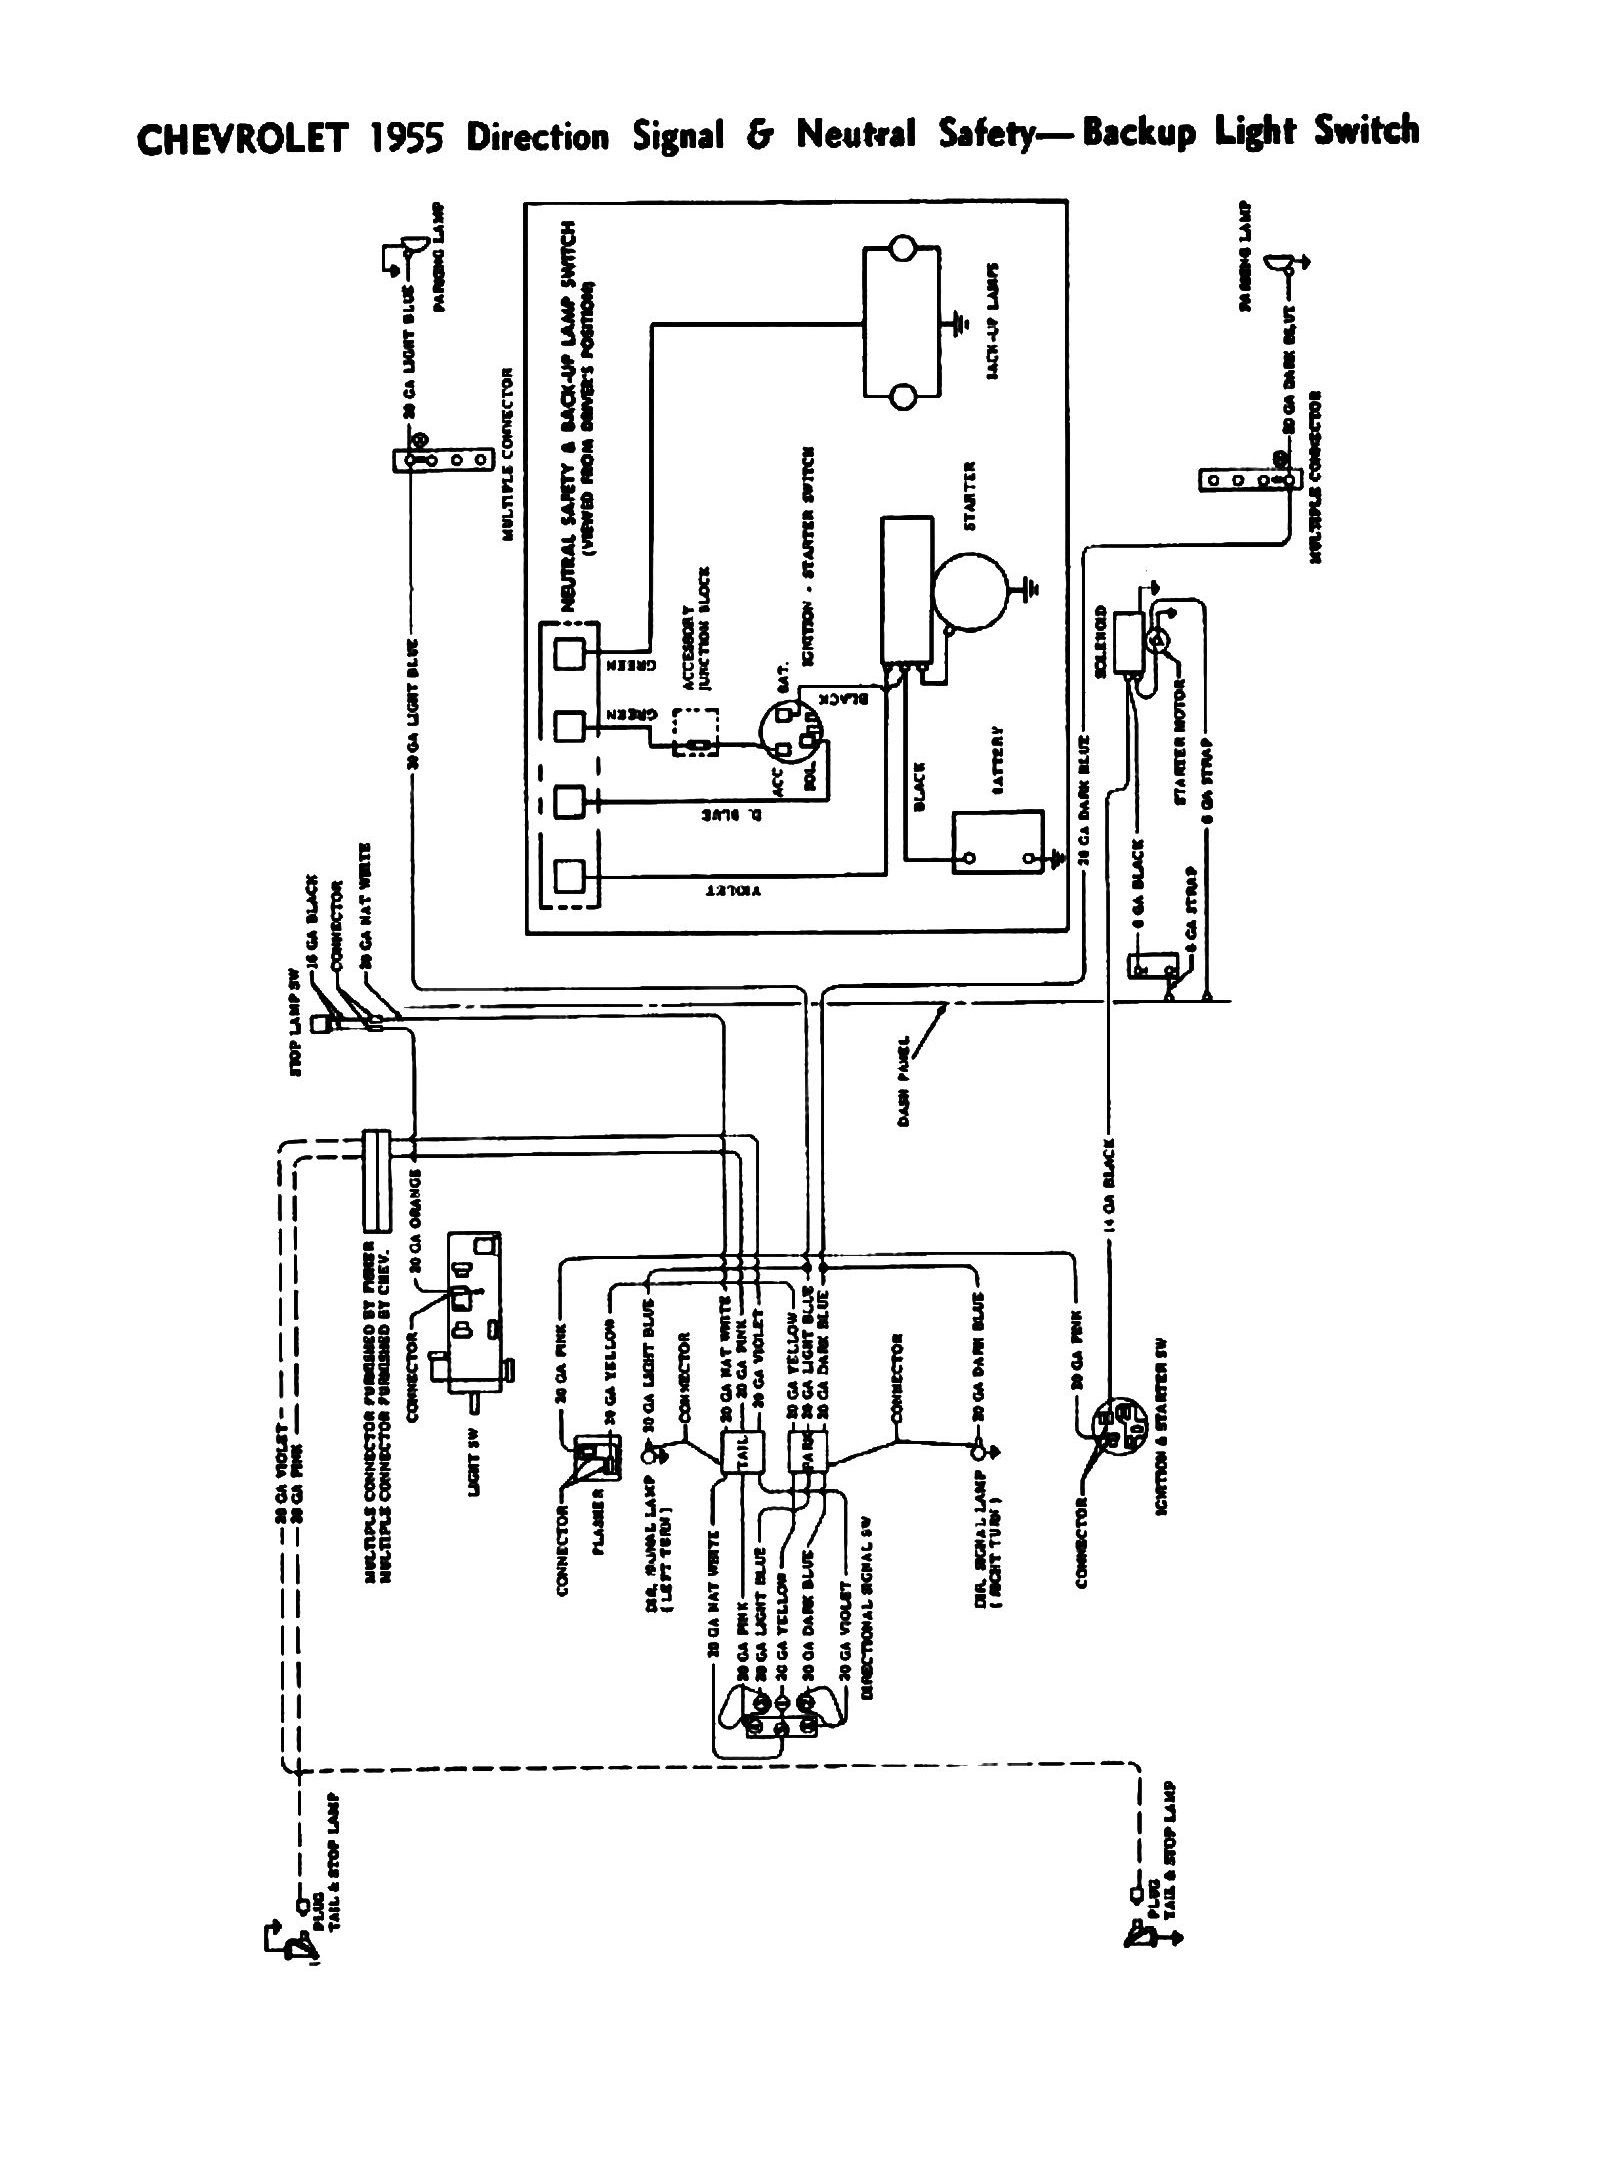 Ignition Switch Wiring Diagram Chevy 1957 Chevy Heater Wiring Diagram Wiring Diagrams Of Ignition Switch Wiring Diagram Chevy